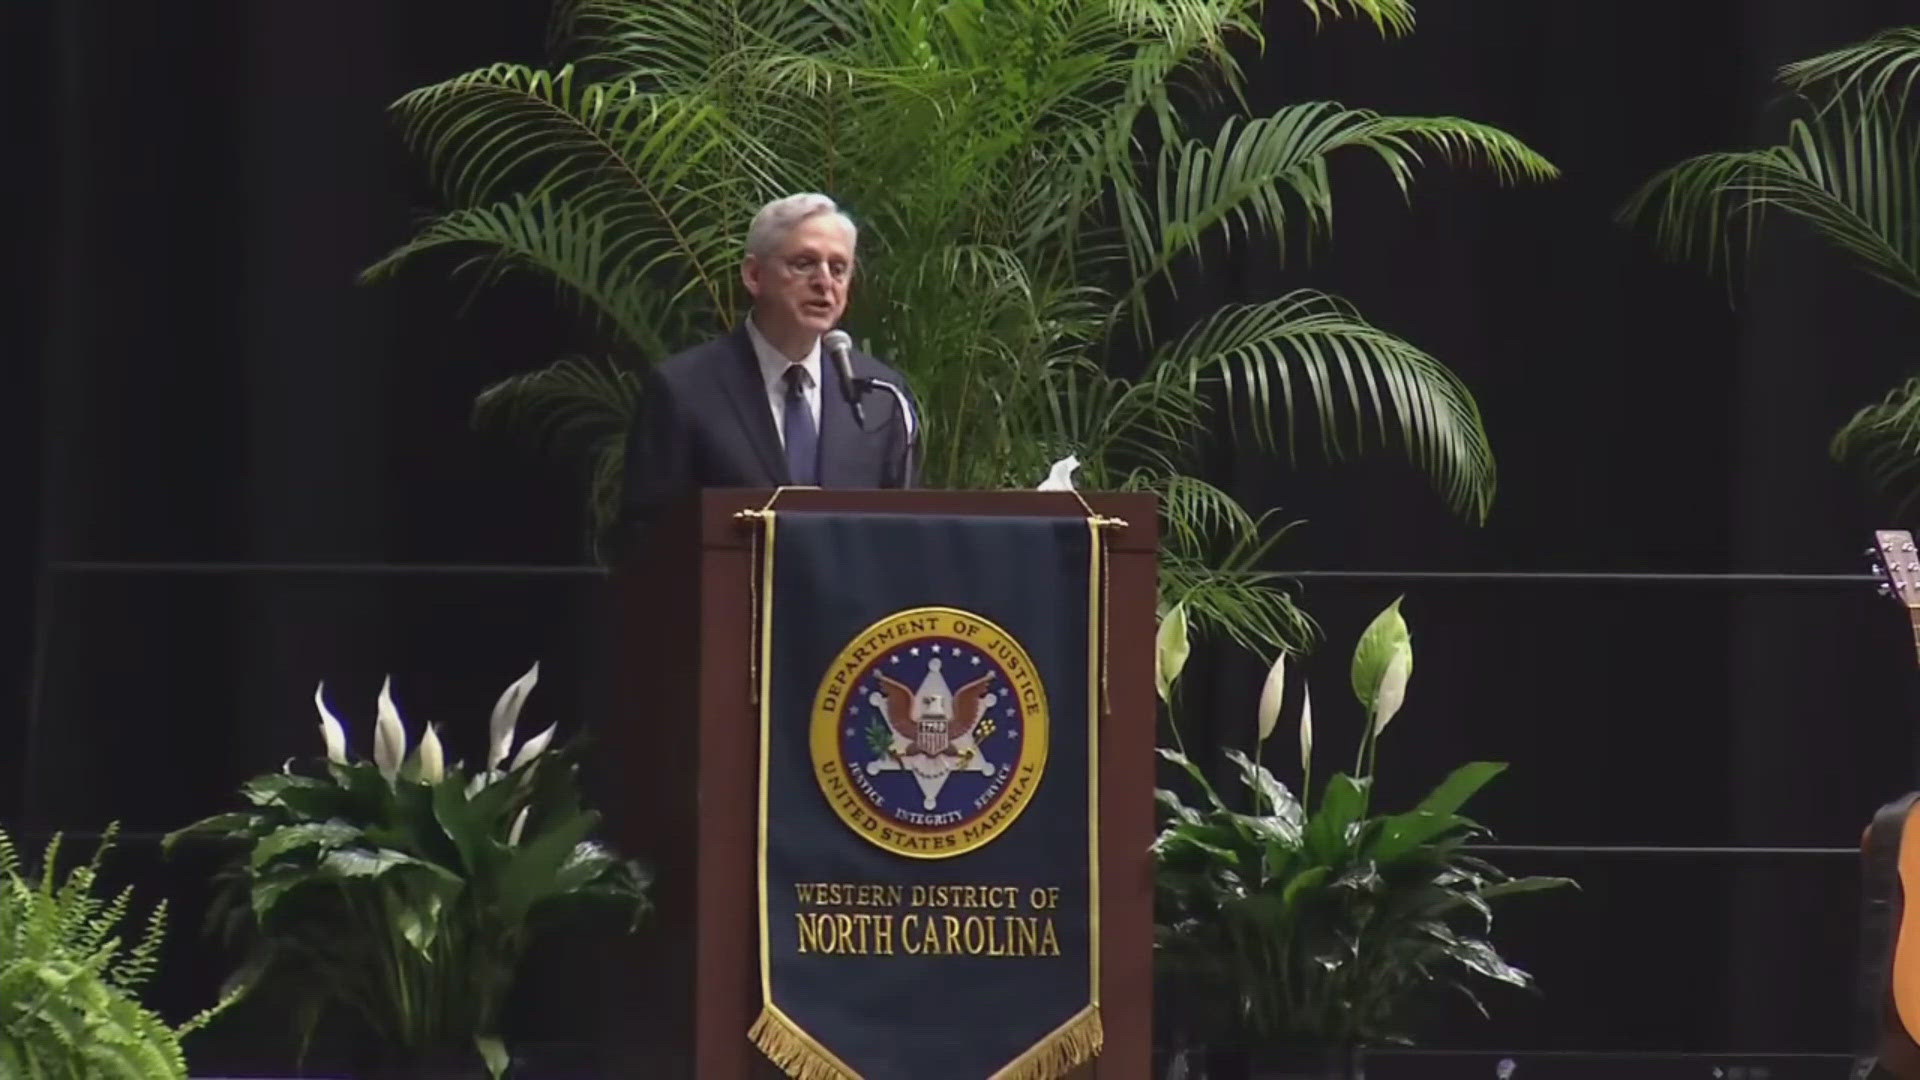 Attorney General Merrick Garland pays tribute to fallen Deputy U.S. Marshal Thomas Weeks, who was killed in the line of duty in Charlotte on April 29.